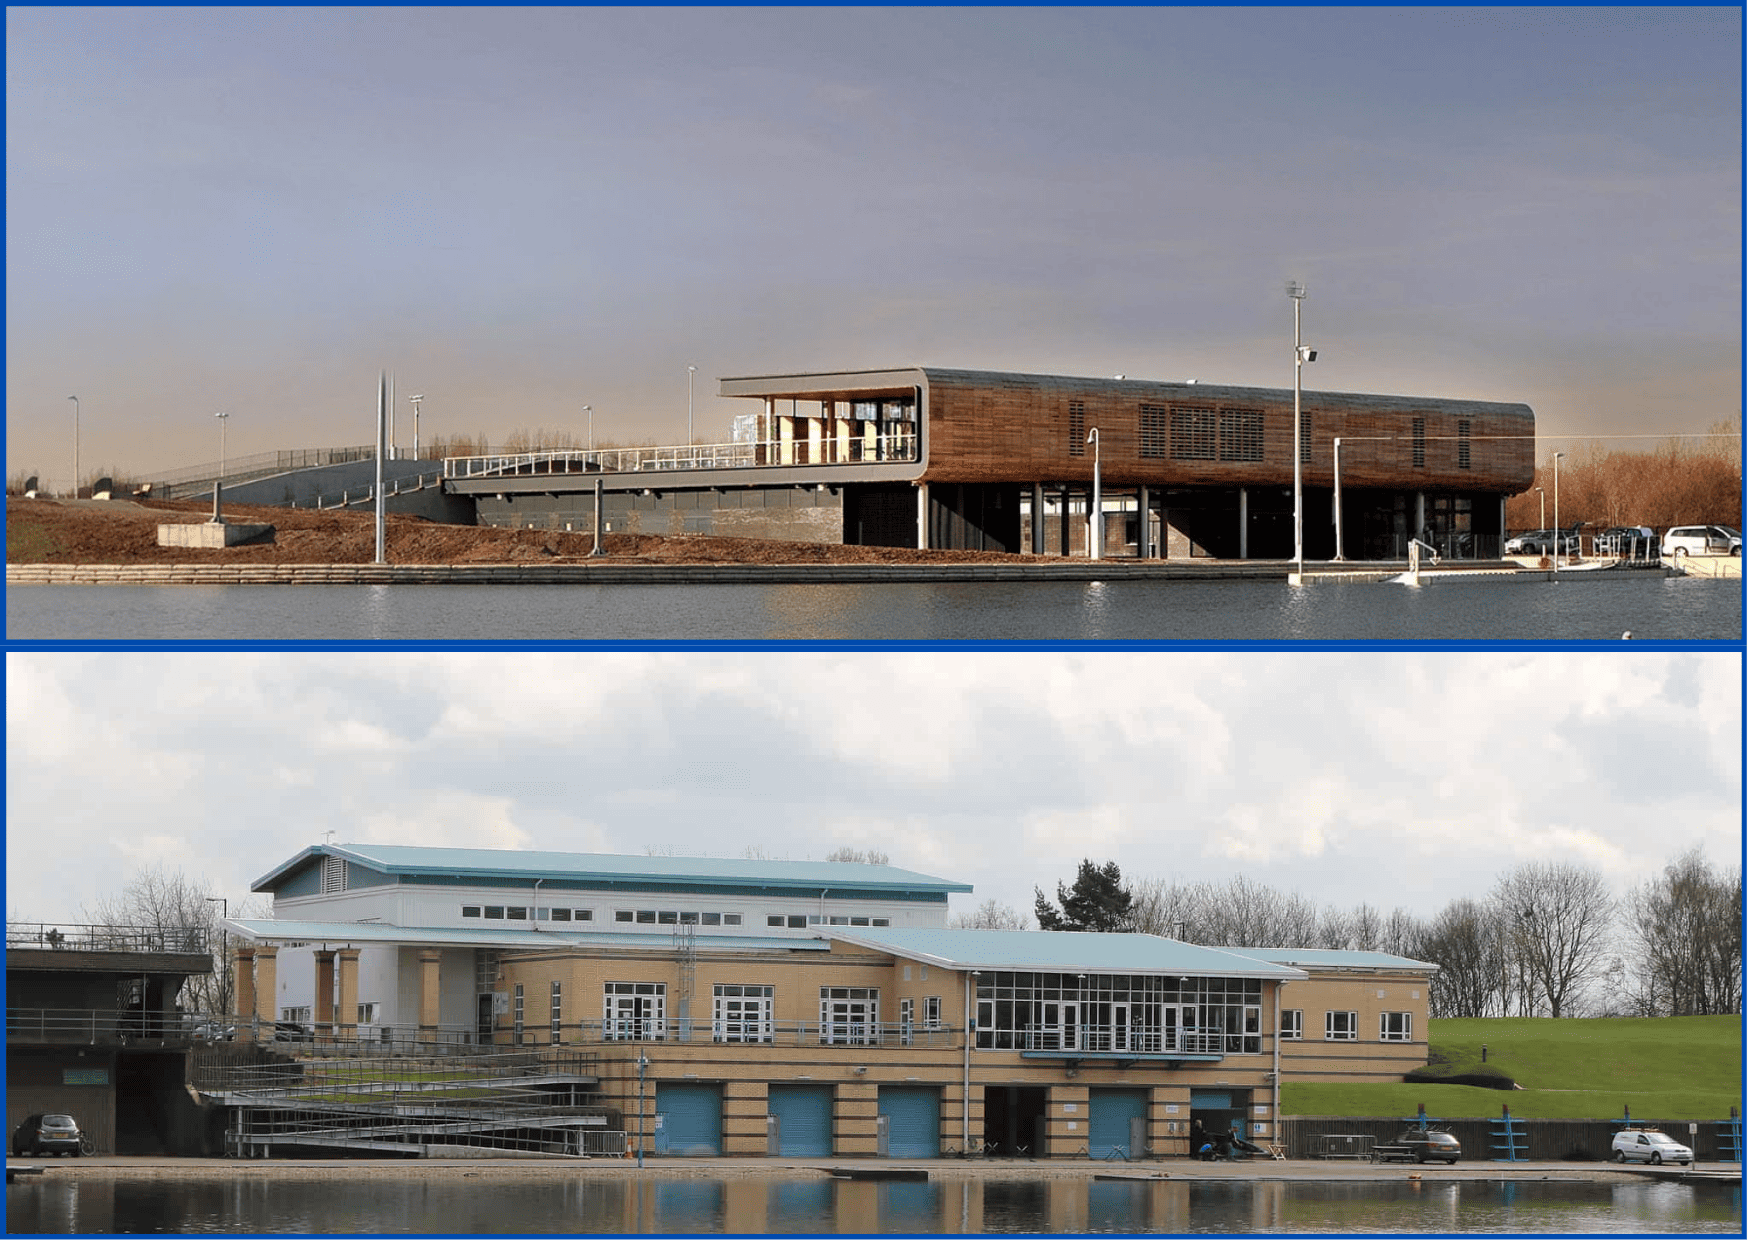 IMages of Holme Pierrepont and Lee Valley